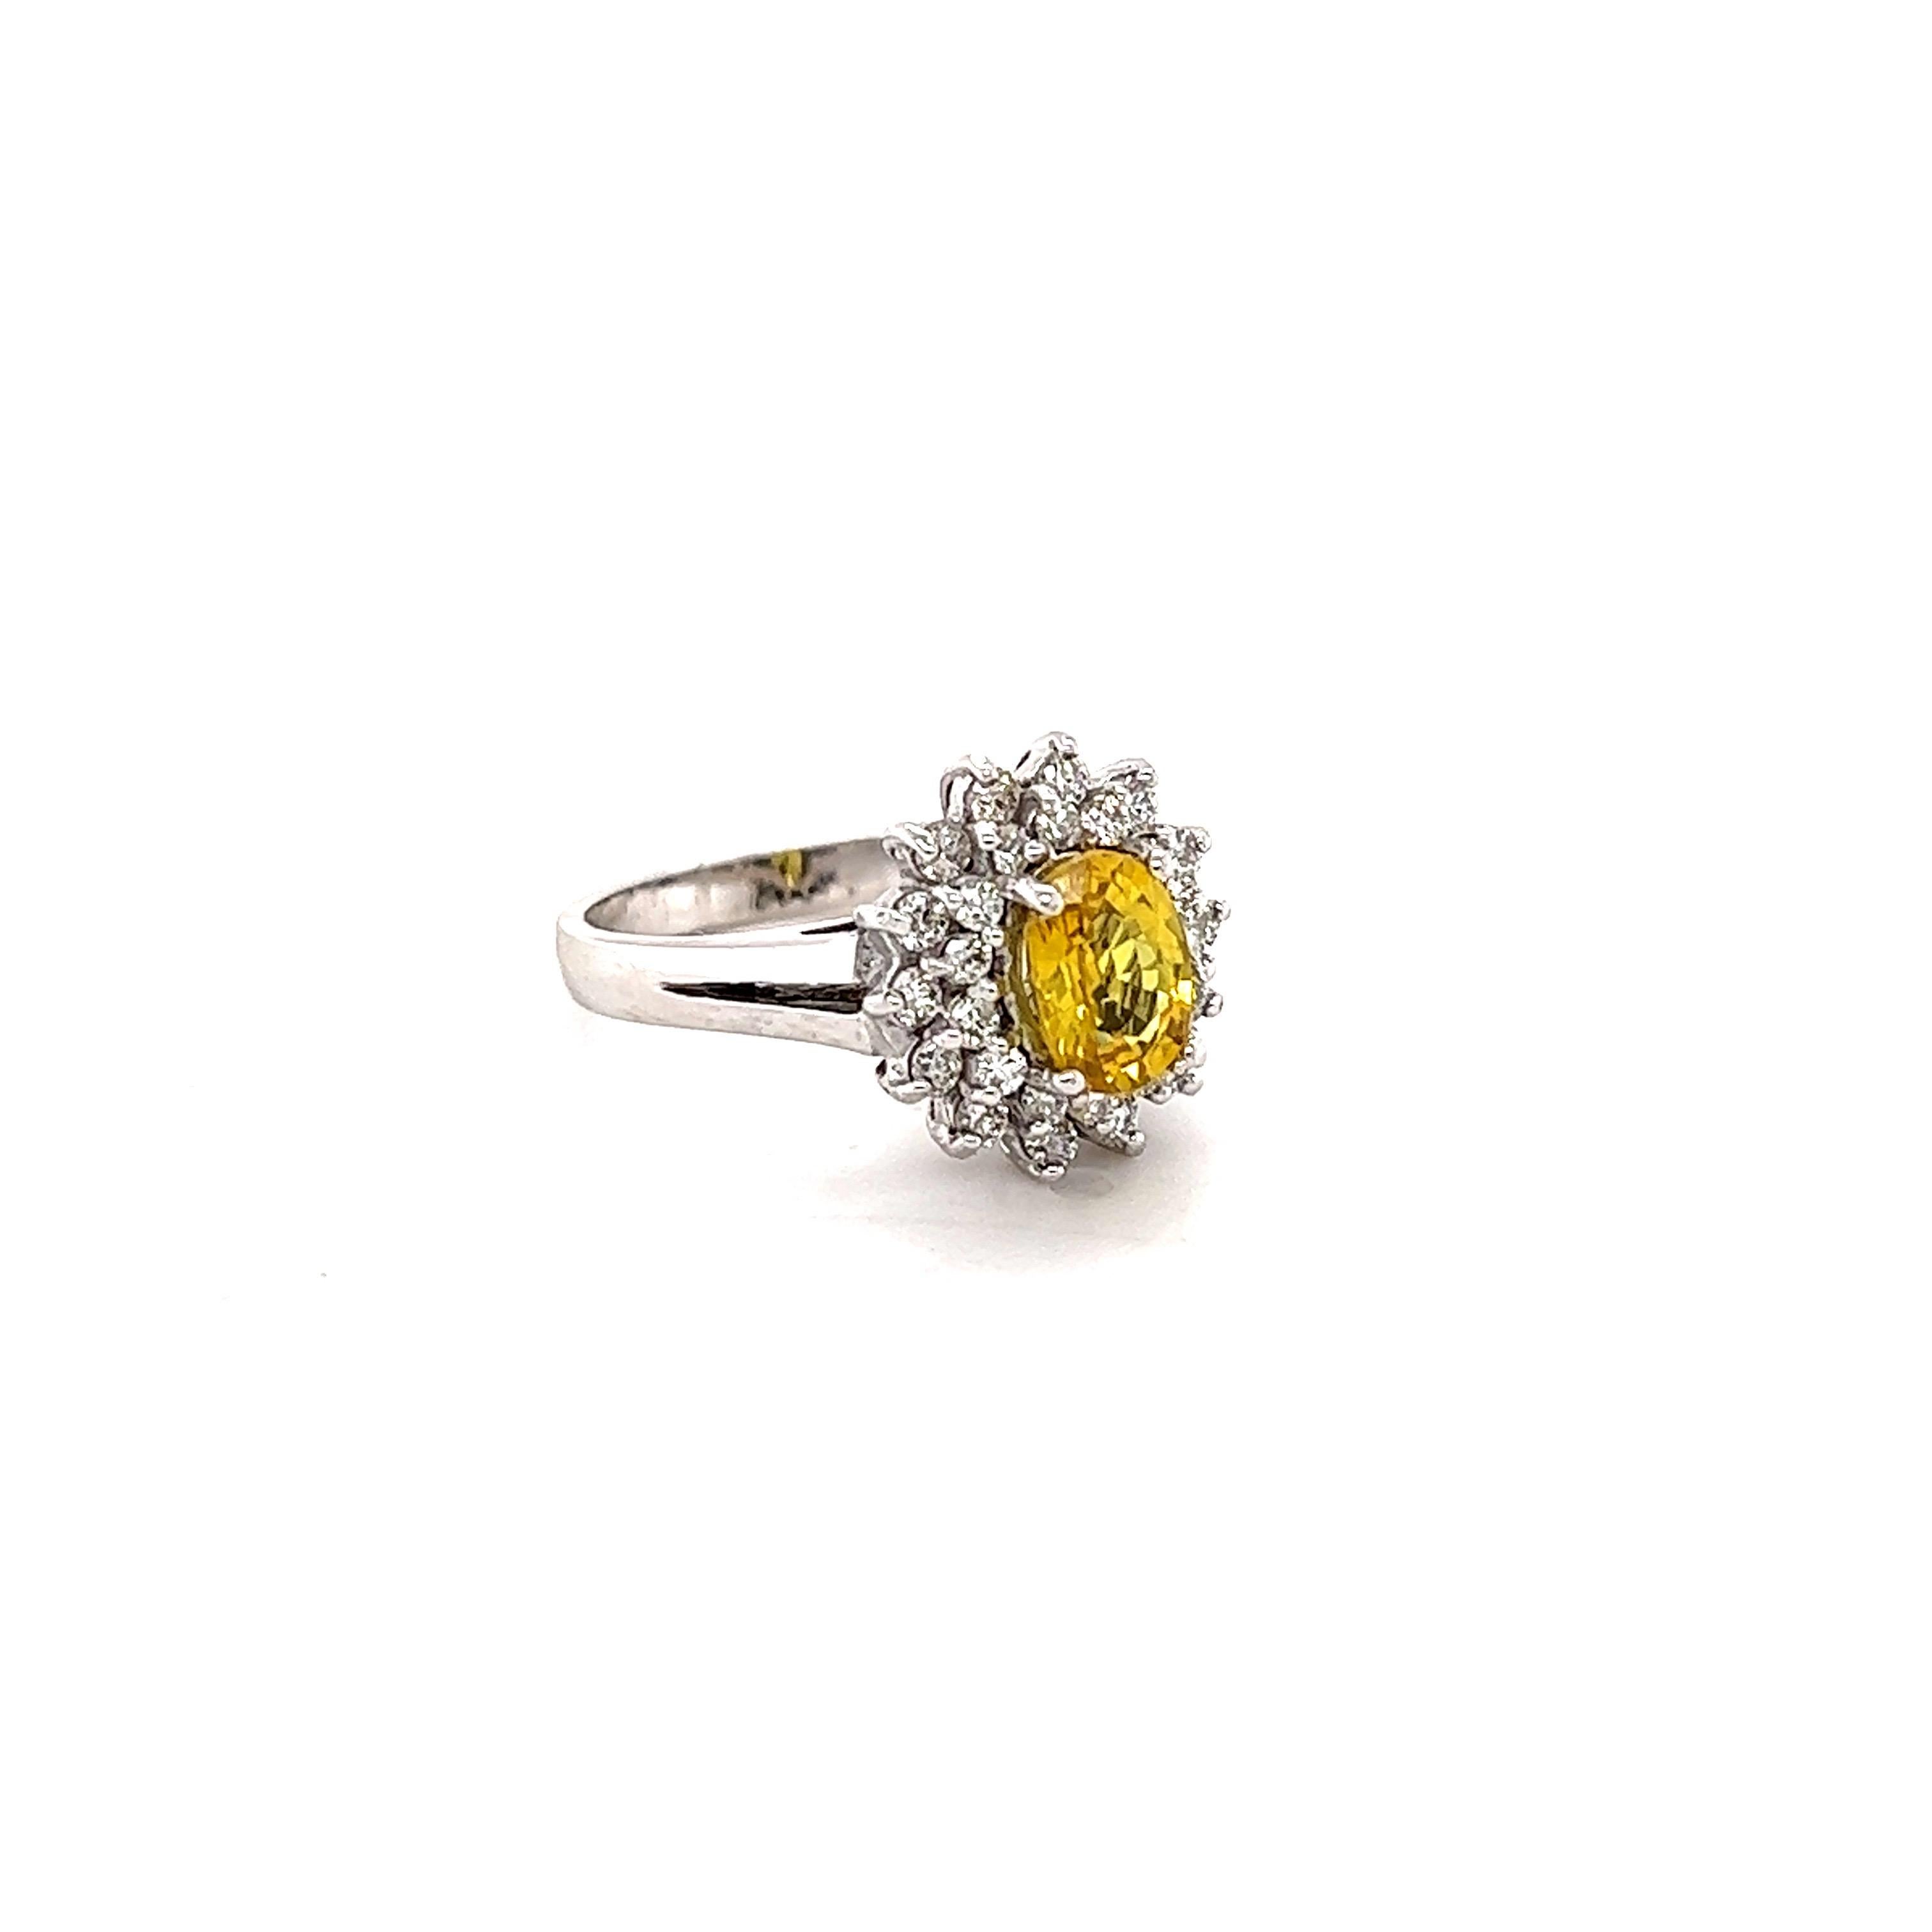 This beautiful ring has a Natural Oval Cut Heated Yellow Sapphire that weights 1.16 Carats. The Yellow Sapphire measures at 7 mm x 5 mm. 

The ring is embellished with 28 Round Cut Diamonds that weigh 0.51 Carats with a clarity and color of SI-F.